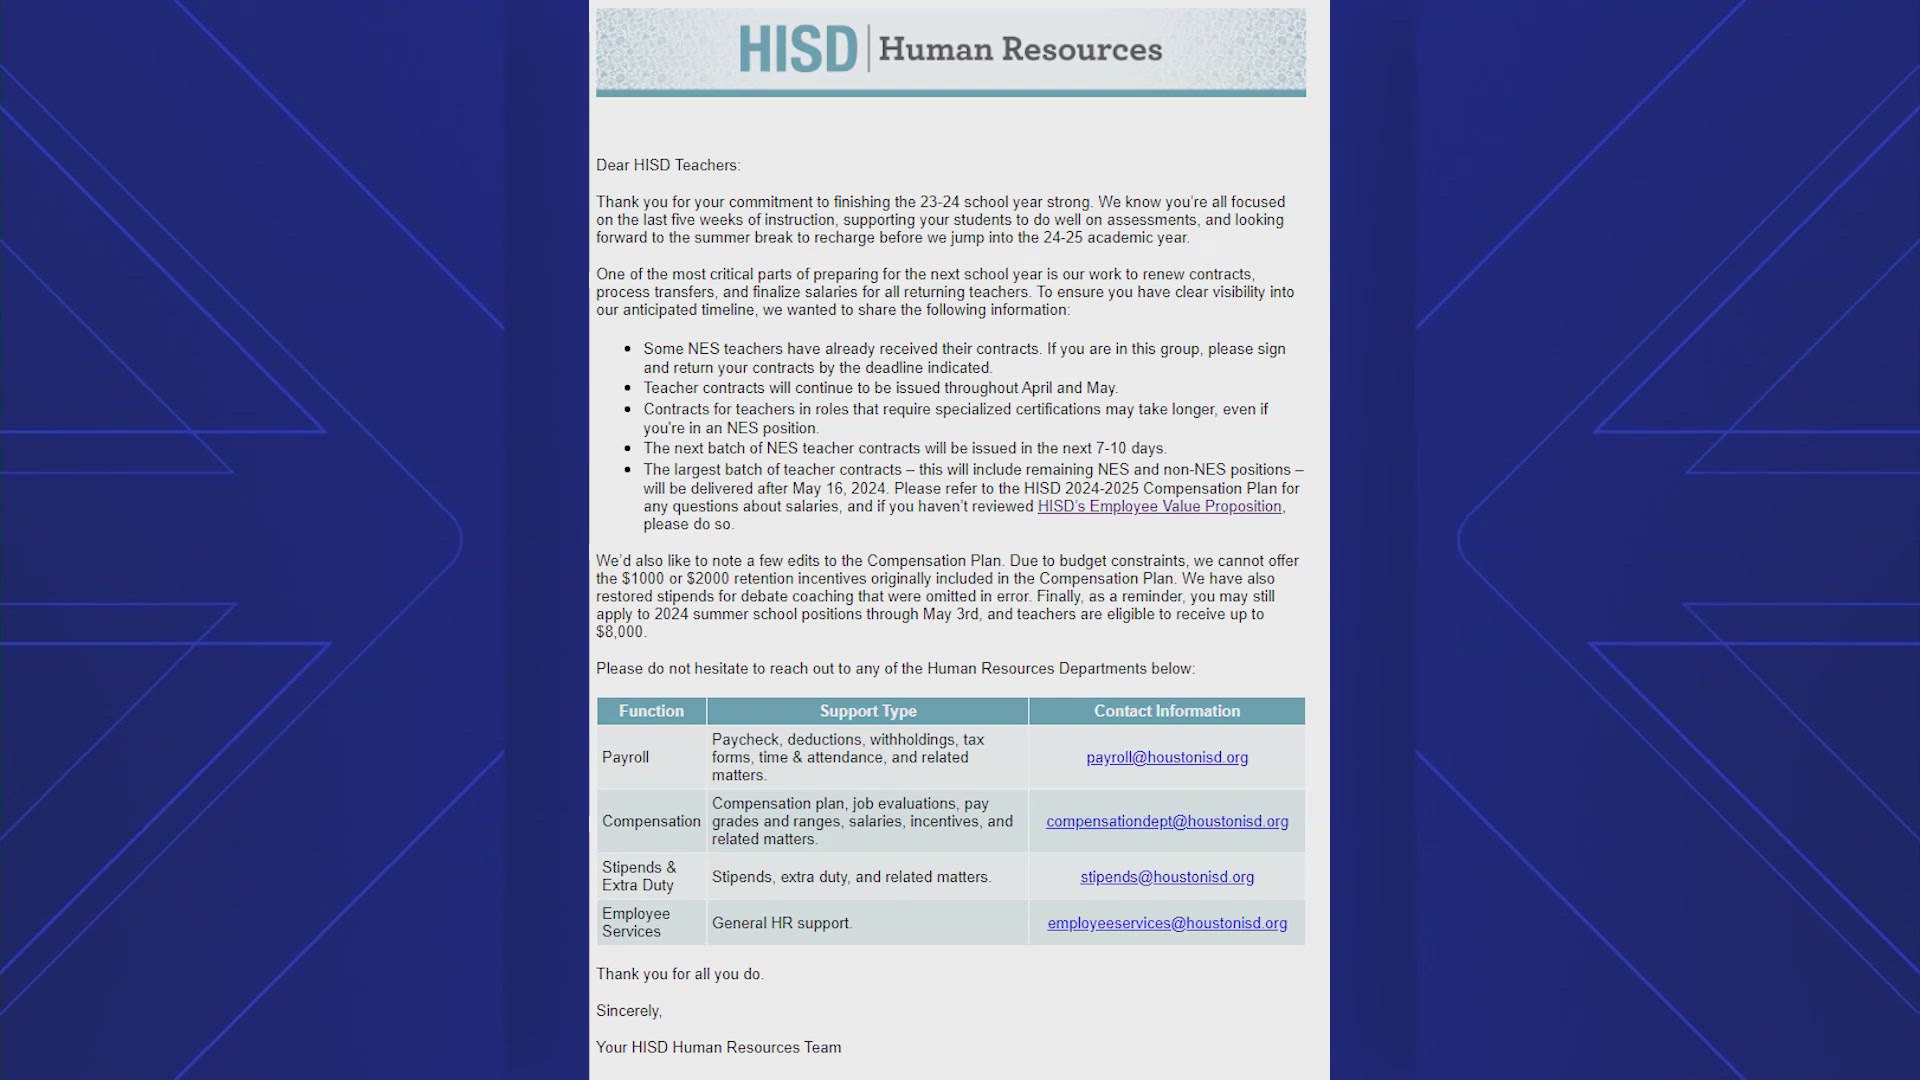 "Due to budget constraints, we cannot offer the $1,000 or $2,000 retention incentives originally included in the Compensation Plan," HISD said.